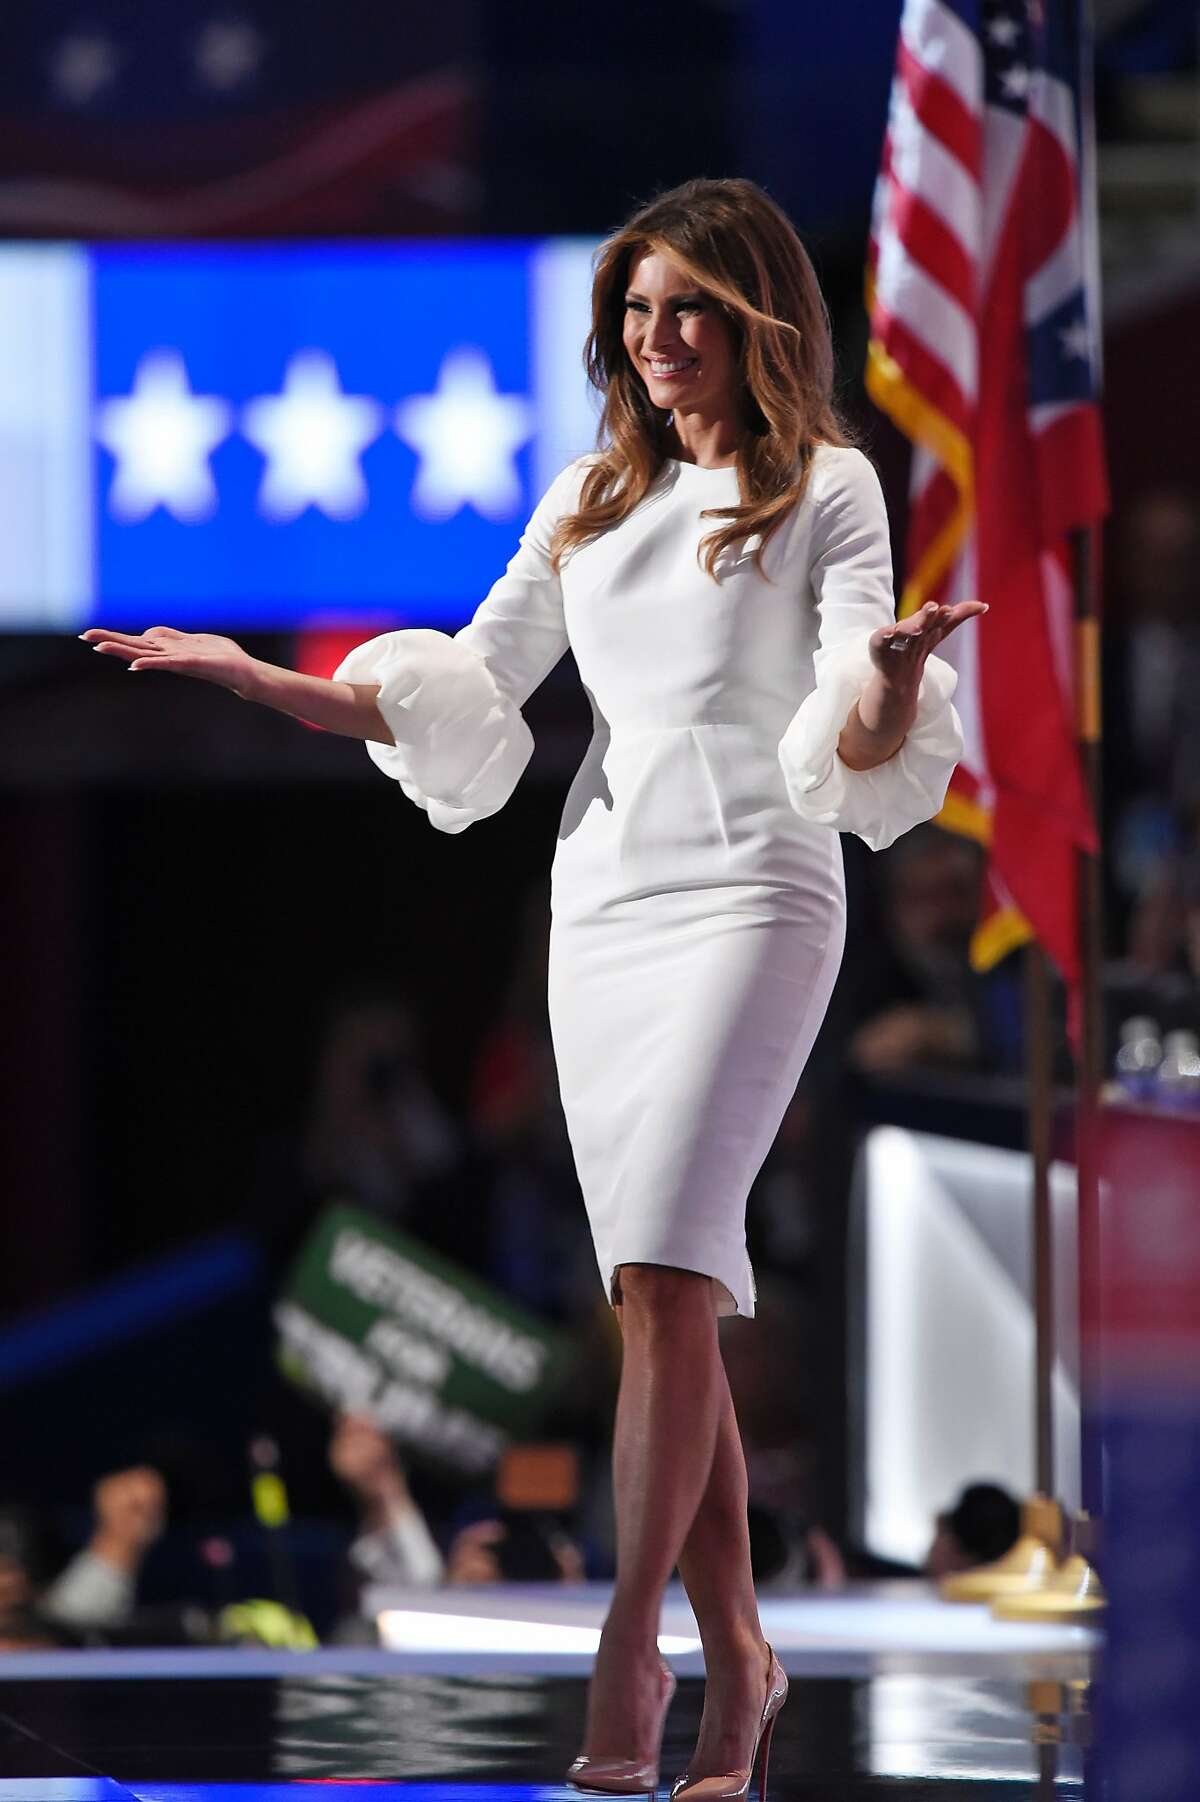 Michelle Obama Naked Porn - Melania Trump's dress sells out moments after her convention speech